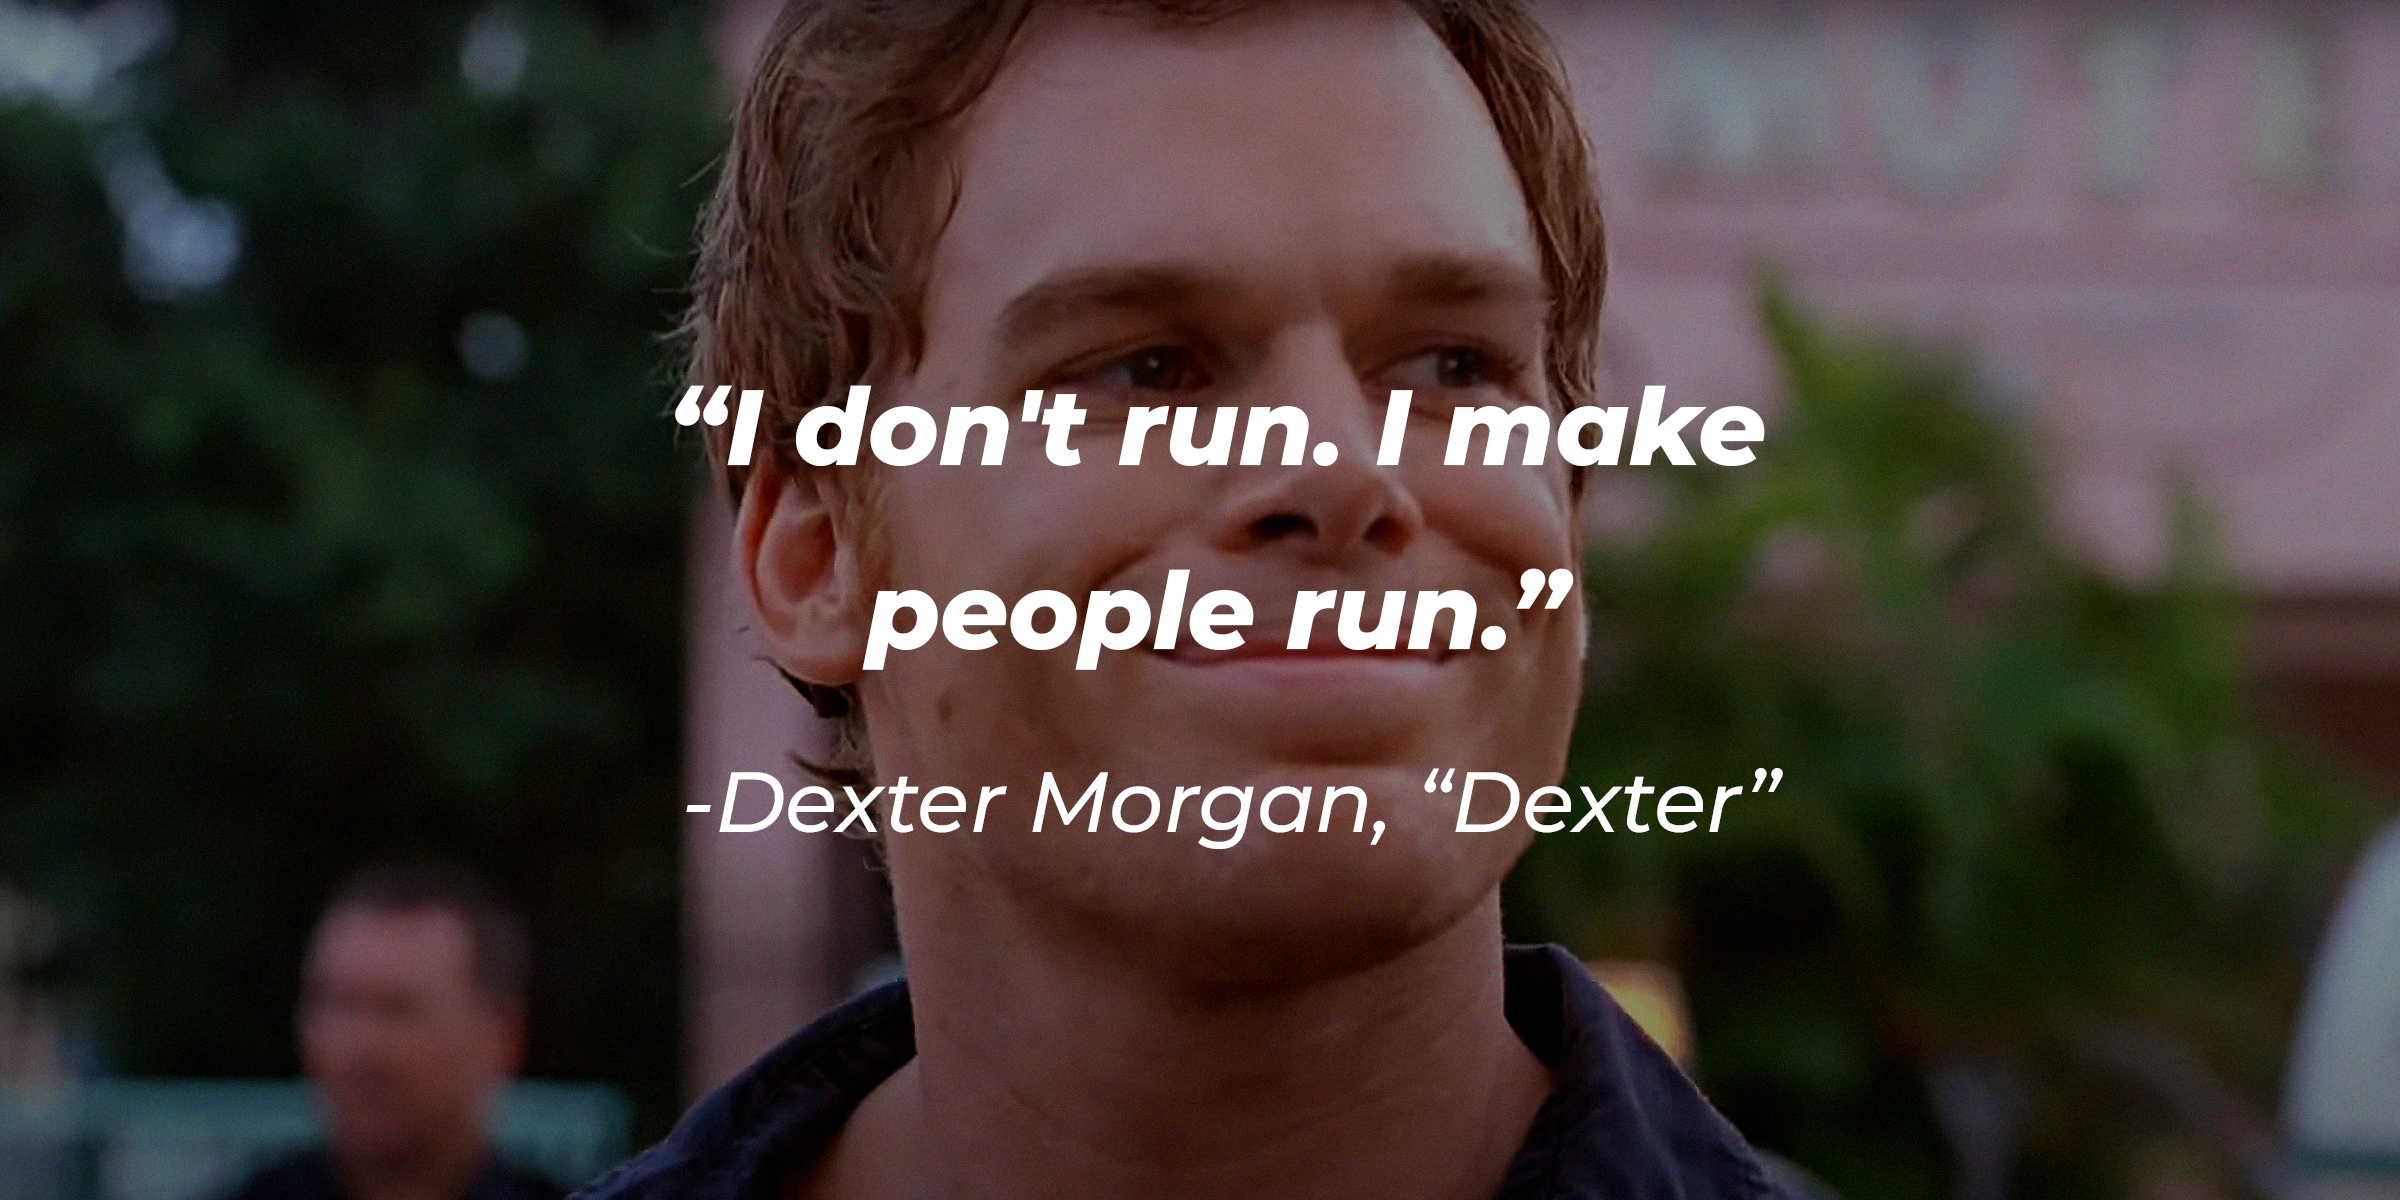 Michael C. Hall as Dexter Morgan in "Dexter," with his quote: "I don't run. I make people run." | Source: Facebook.com/DexterOnShowtime